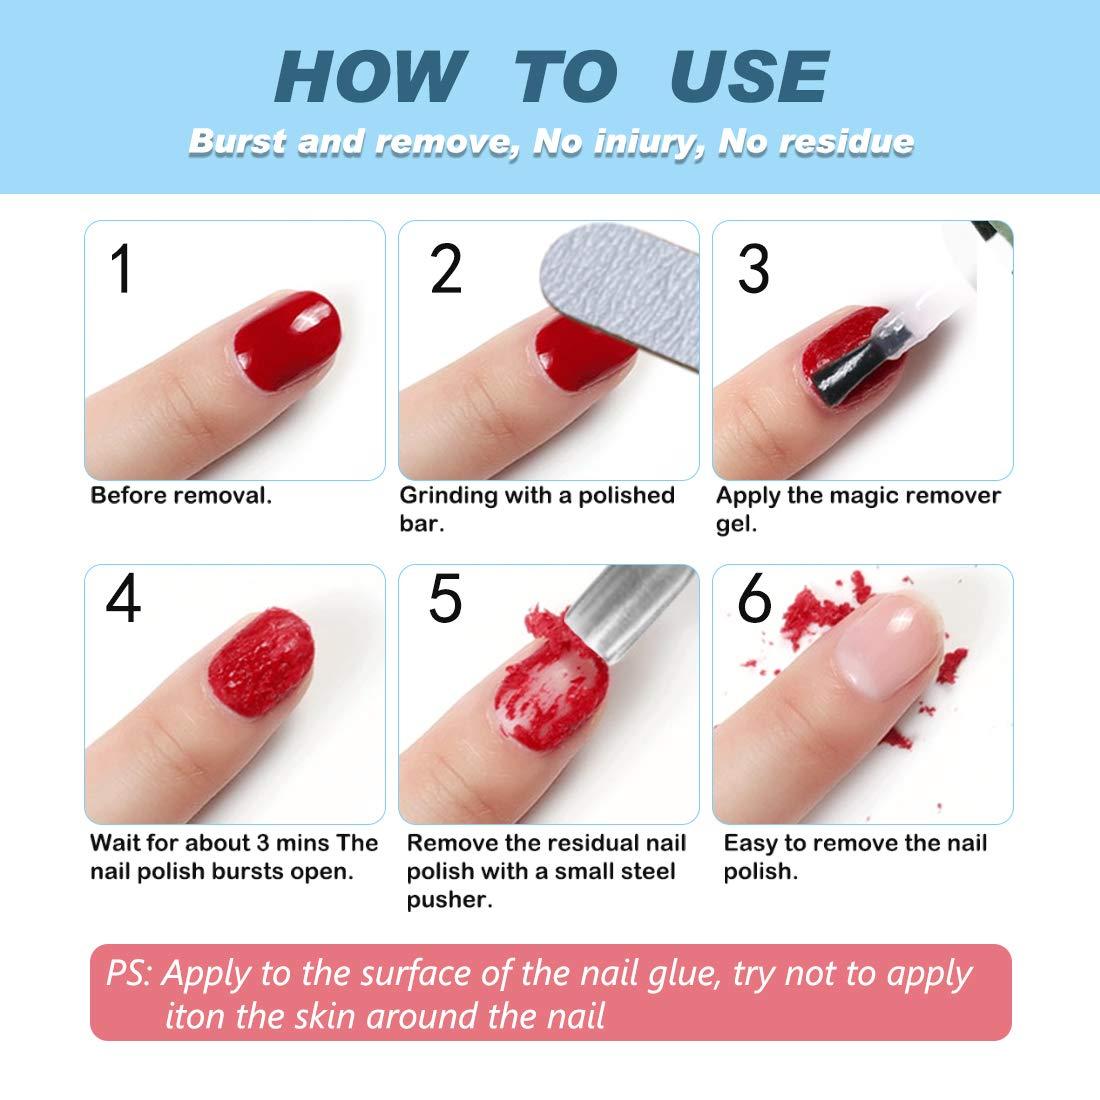 1-pack) Magic Nail Polish Remover, Professional Nail Gel Polish Remover for  Quick and Easy Nail Polish Remove - No Foil, No Wrapping, Removed Safely  and Gently without Causing Damage - 0.5 FL